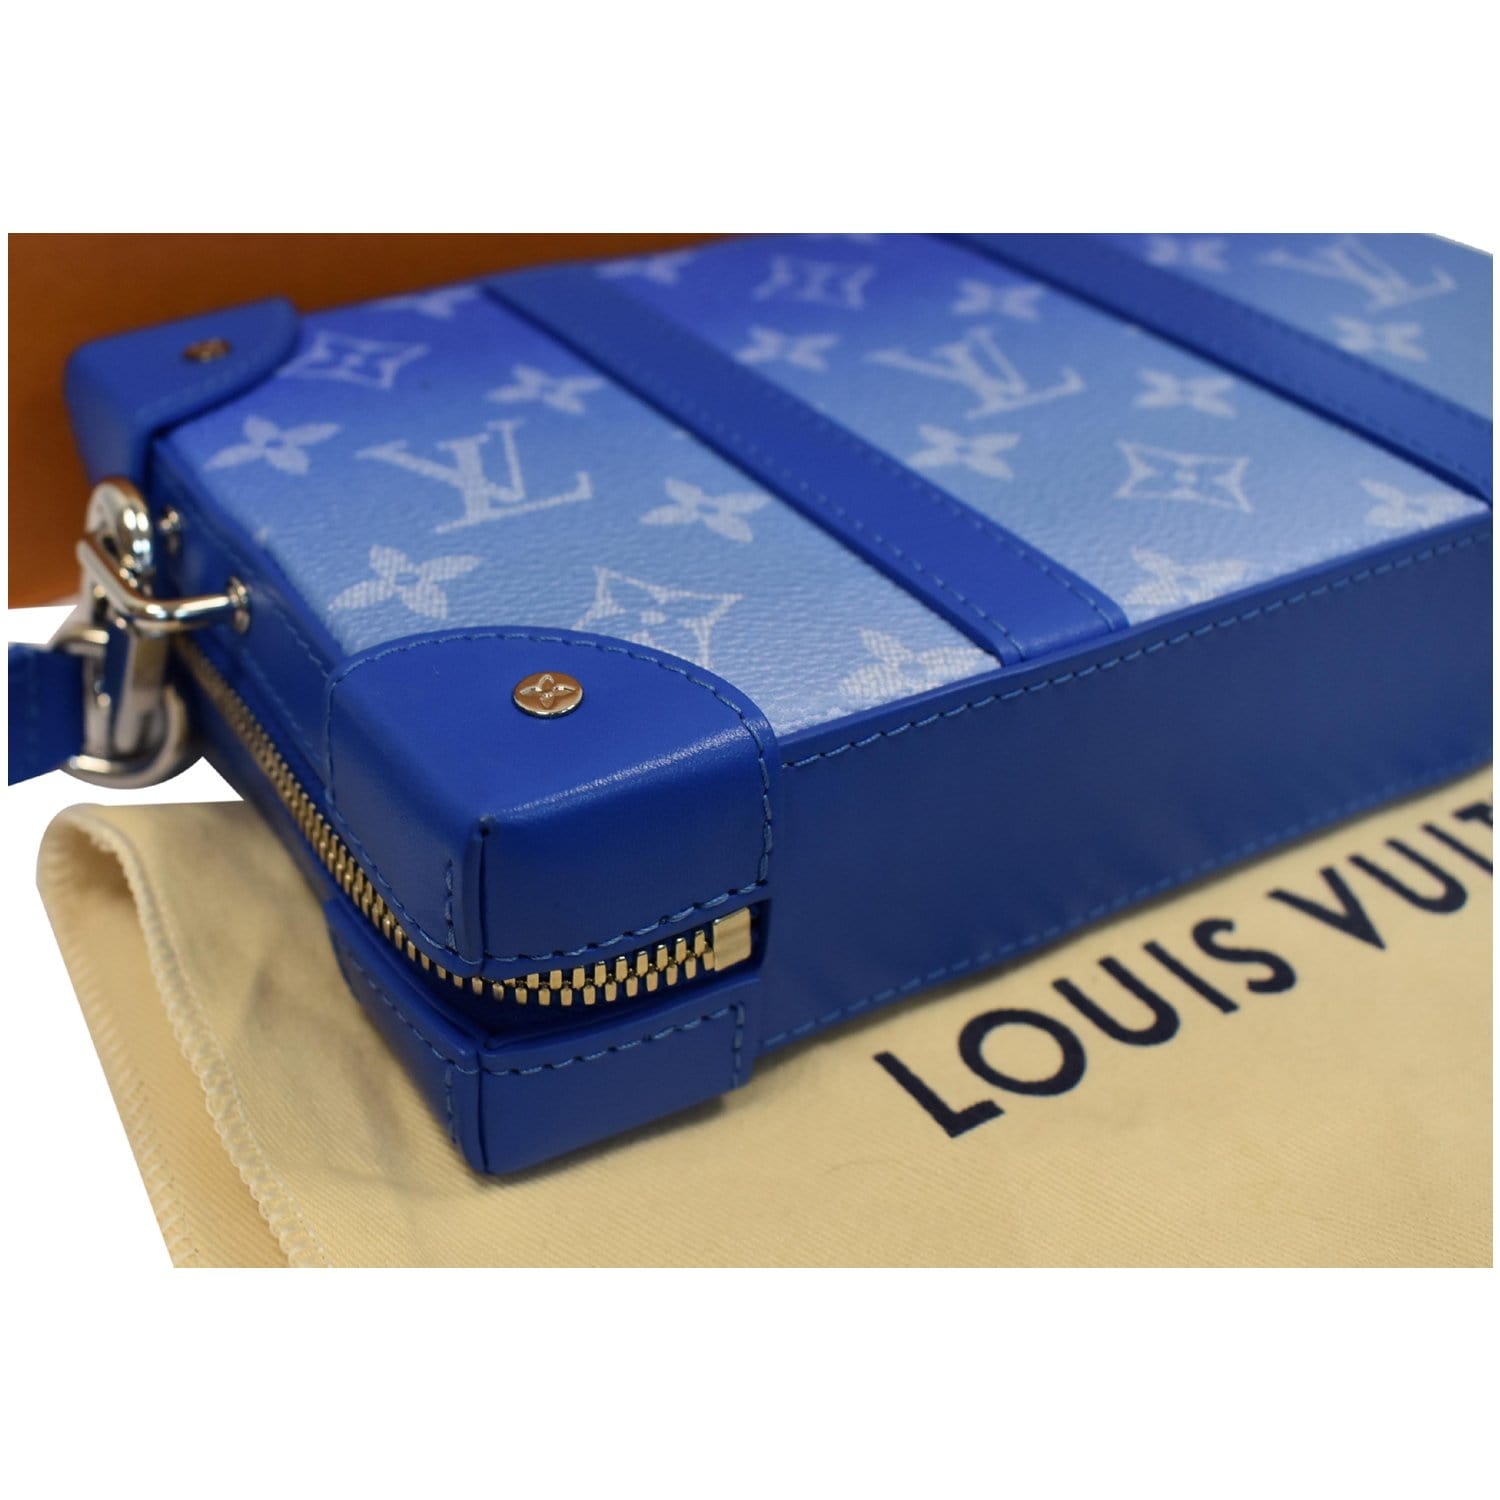 NEW BOXED LOUIS VUITTON LV Monogram Clouds Soft Trunk NW. Rare. FULL DOCS